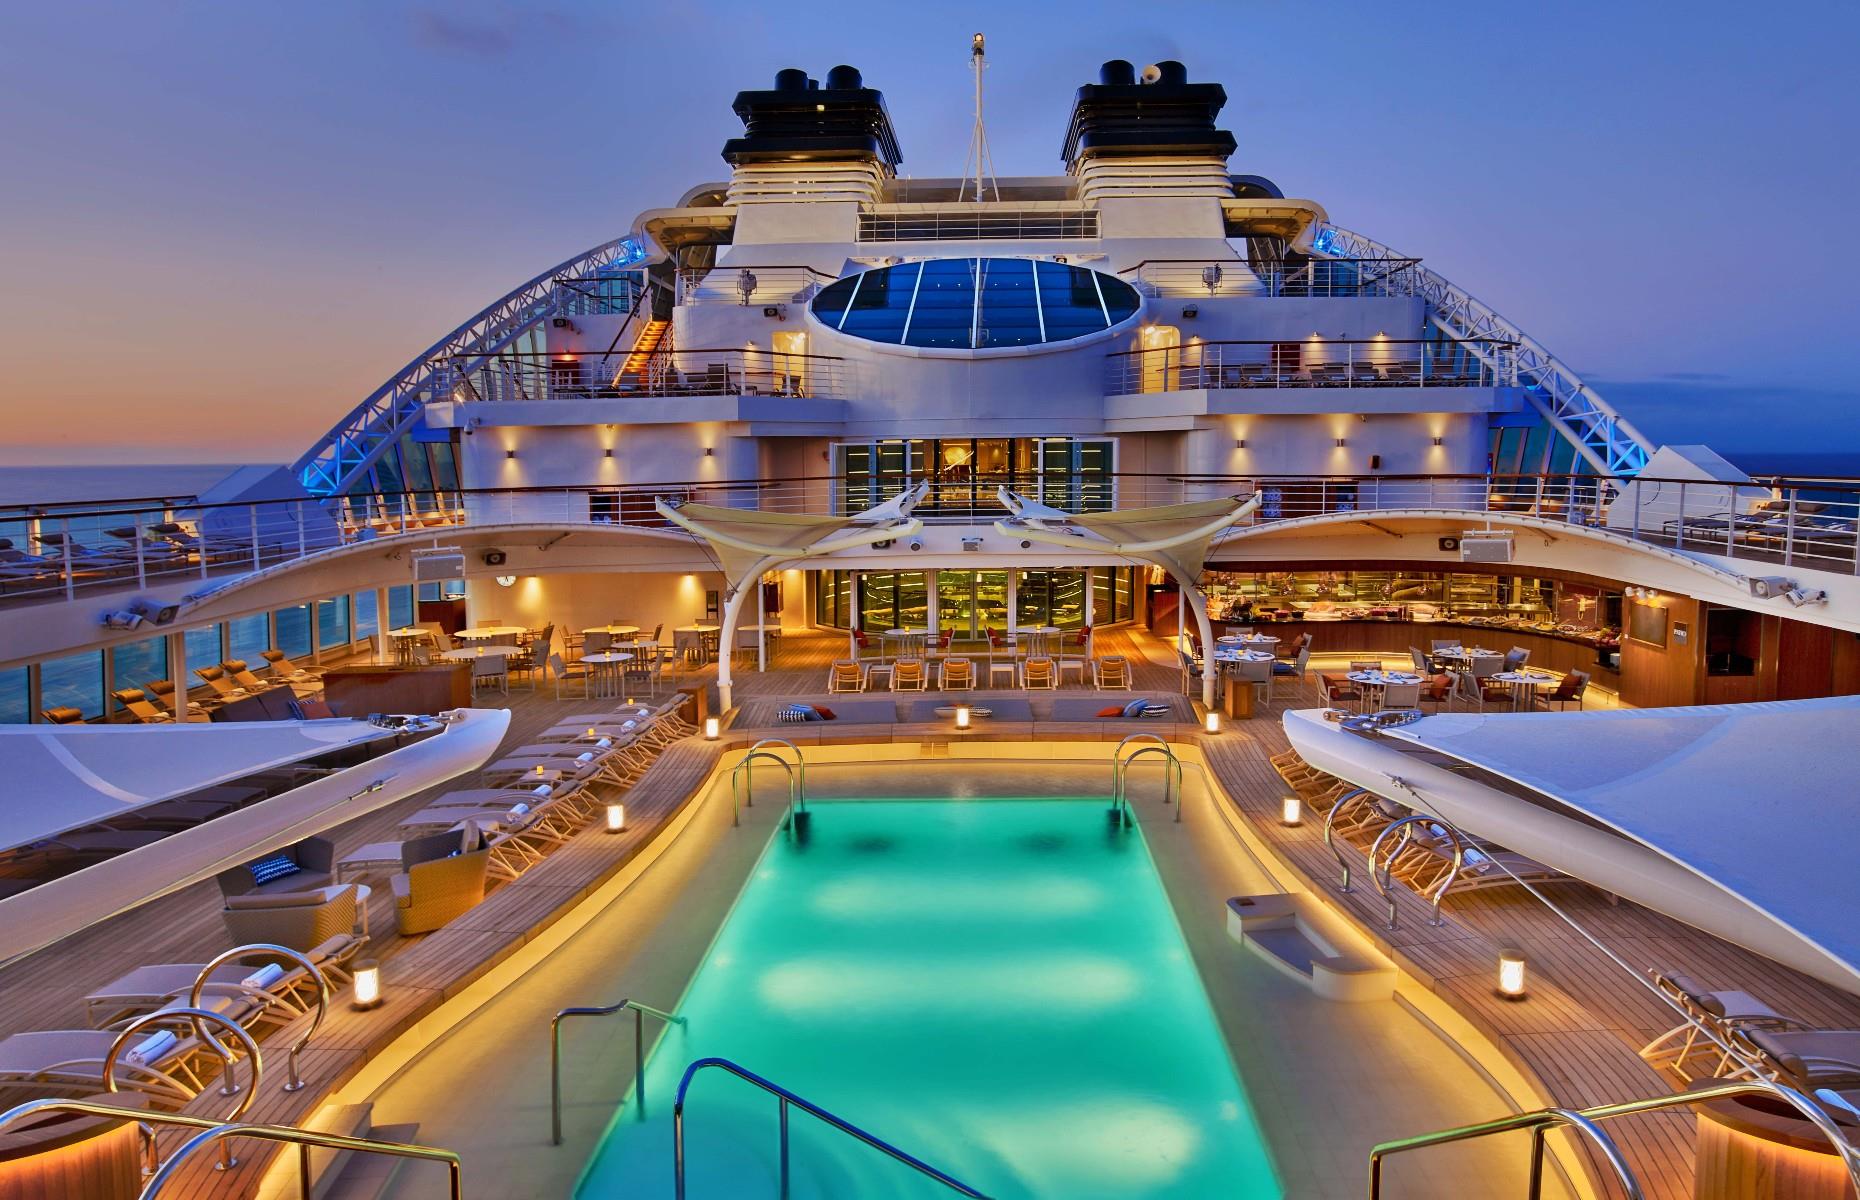 <p><a href="https://www.seabourn.com/en_US/cruise-ships/seabourn-encore/1.html">Seabourn Encore</a> is the newest striking ship in the cruise line's ultra-luxury fleet. Modelled on the trio of ships introduced with Seabourn Odyssey, Seabourn Encore represents another stage in the evolution of small ship cruising. There are 300 suites in total, including 16 penthouse suites and five penthouse spa suites, all with verandas facing the ocean.</p>